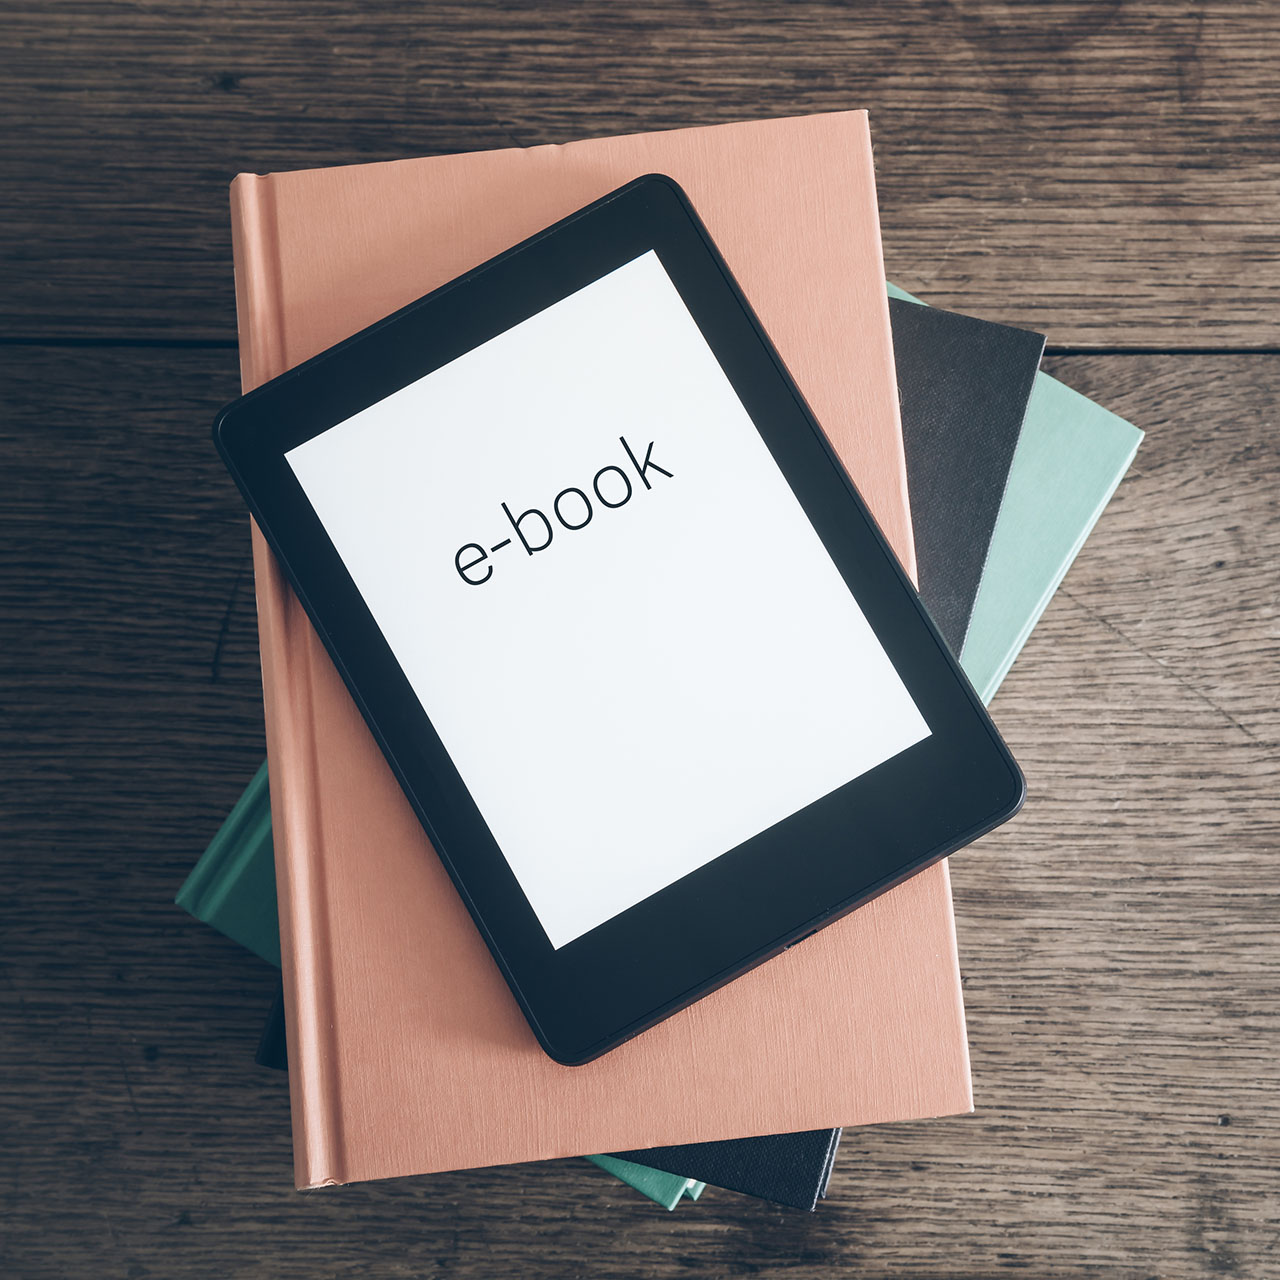 The Impact of E-Book Distribution on Print Sales: Analysis of a Natural Experiment